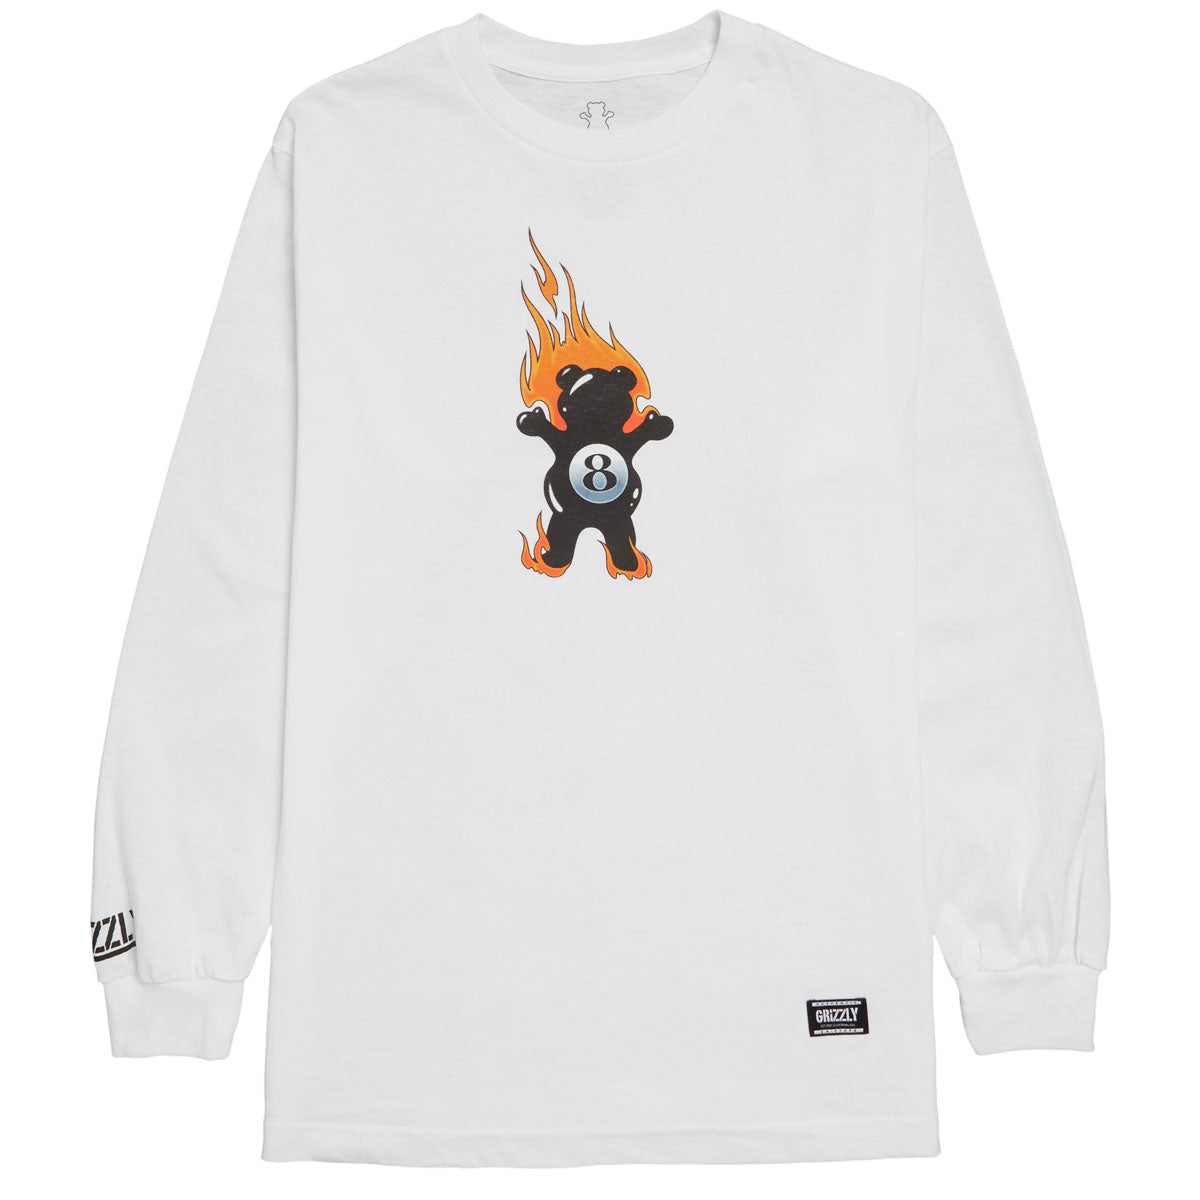 Grizzly Behind The 8Ball Long Sleeve T-Shirt - White image 1